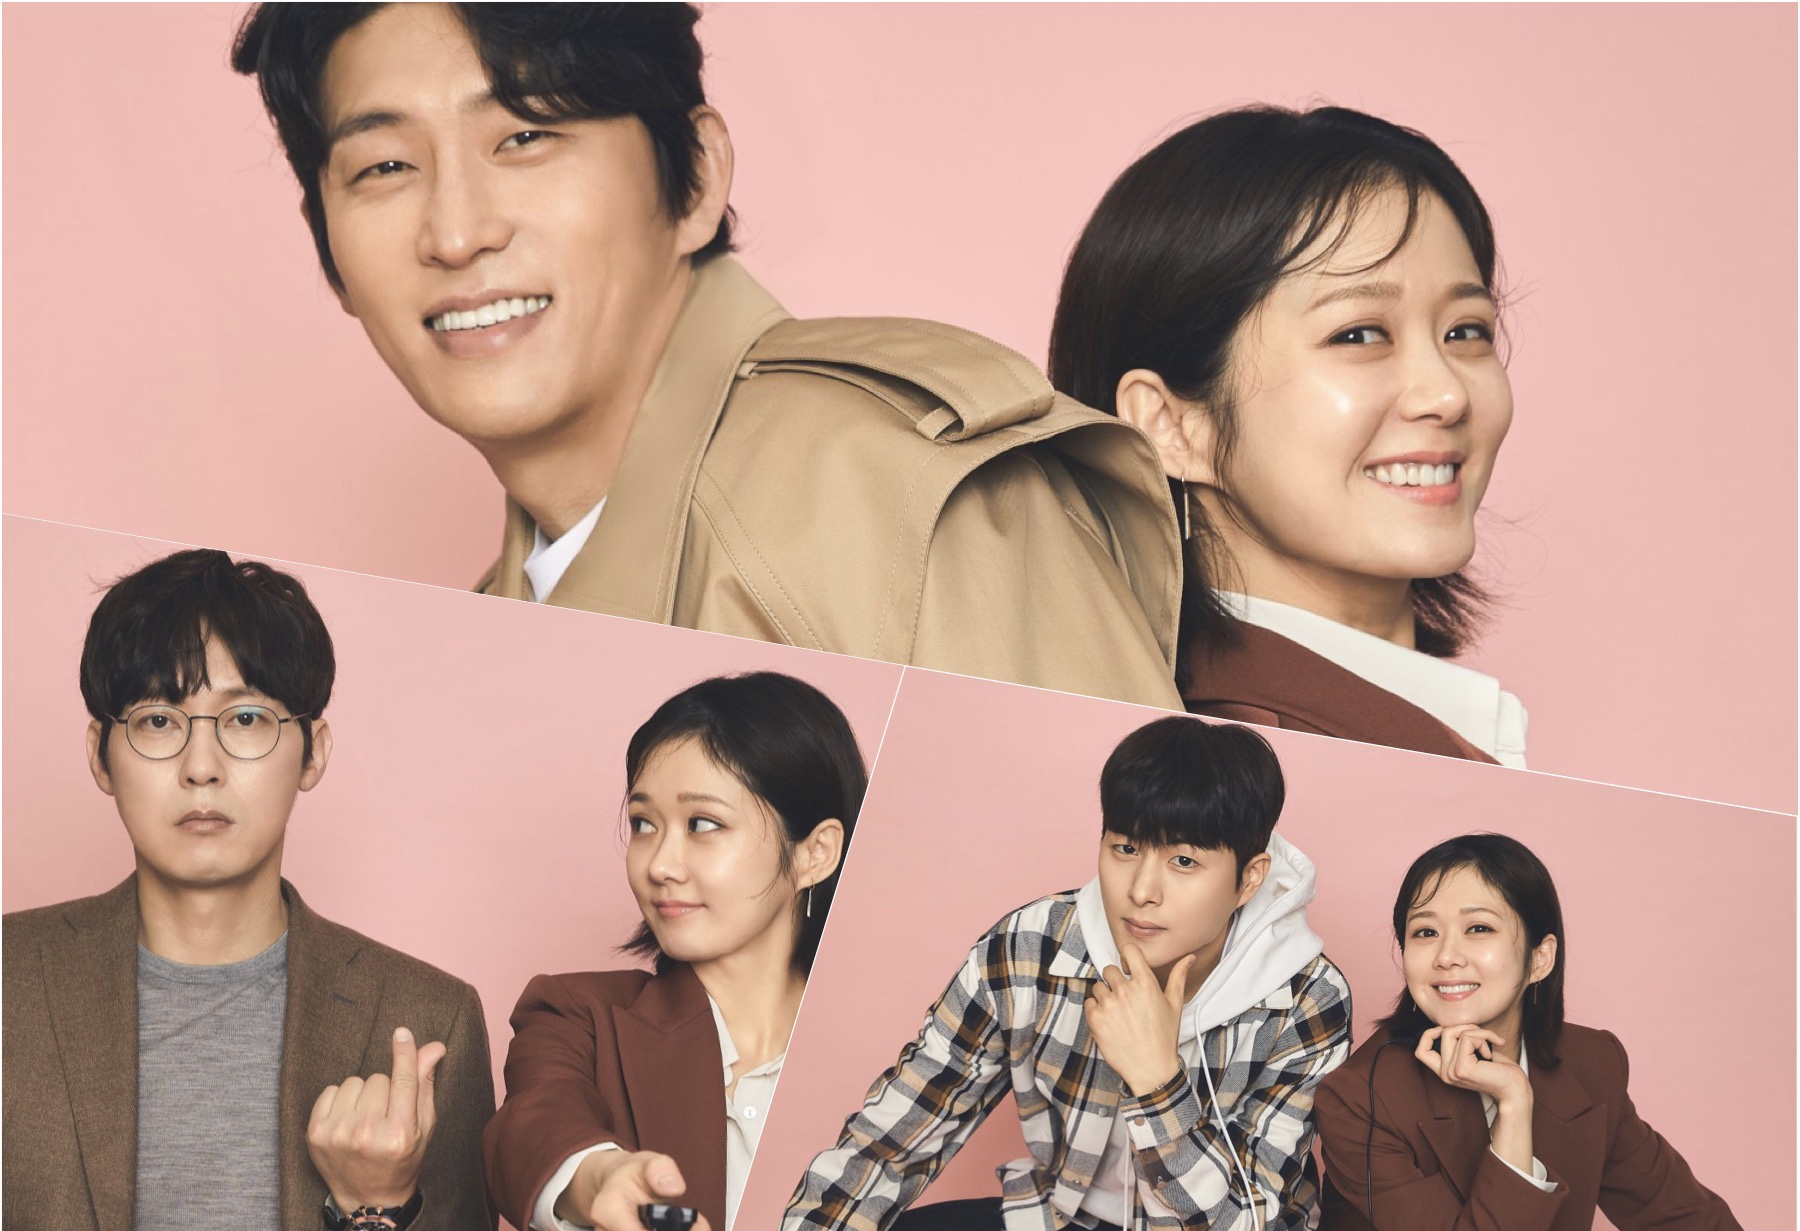 Jang Nara having fun with co-actors in ‘Oh My Baby’ new teaser images